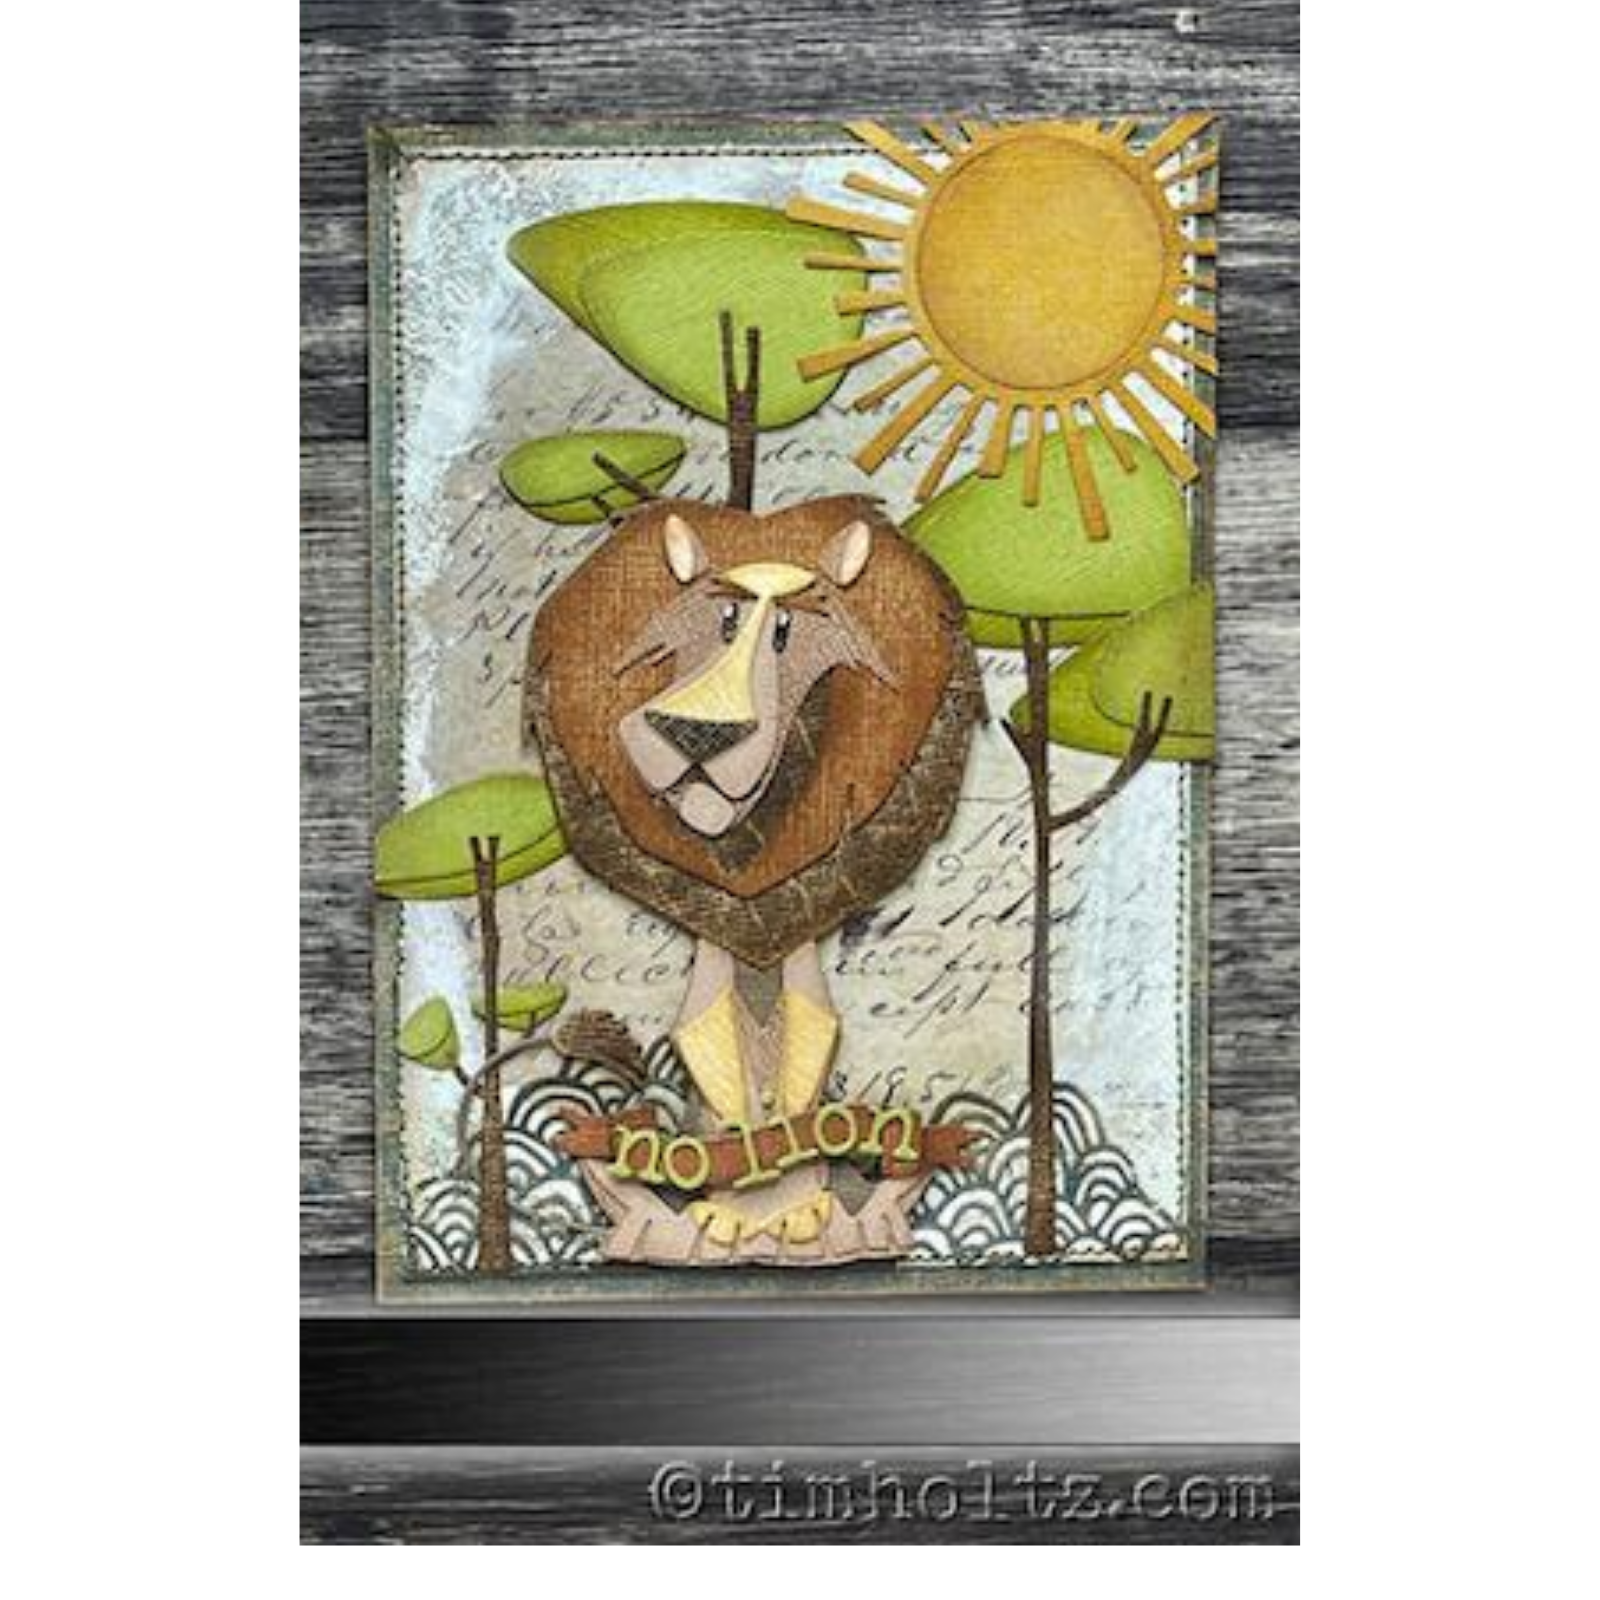 Tim Holtz Funky Trees Dies - Treetops, Trunks, Shrub, Stems - 665217 - Add to greeting cards, tags, off the page creations